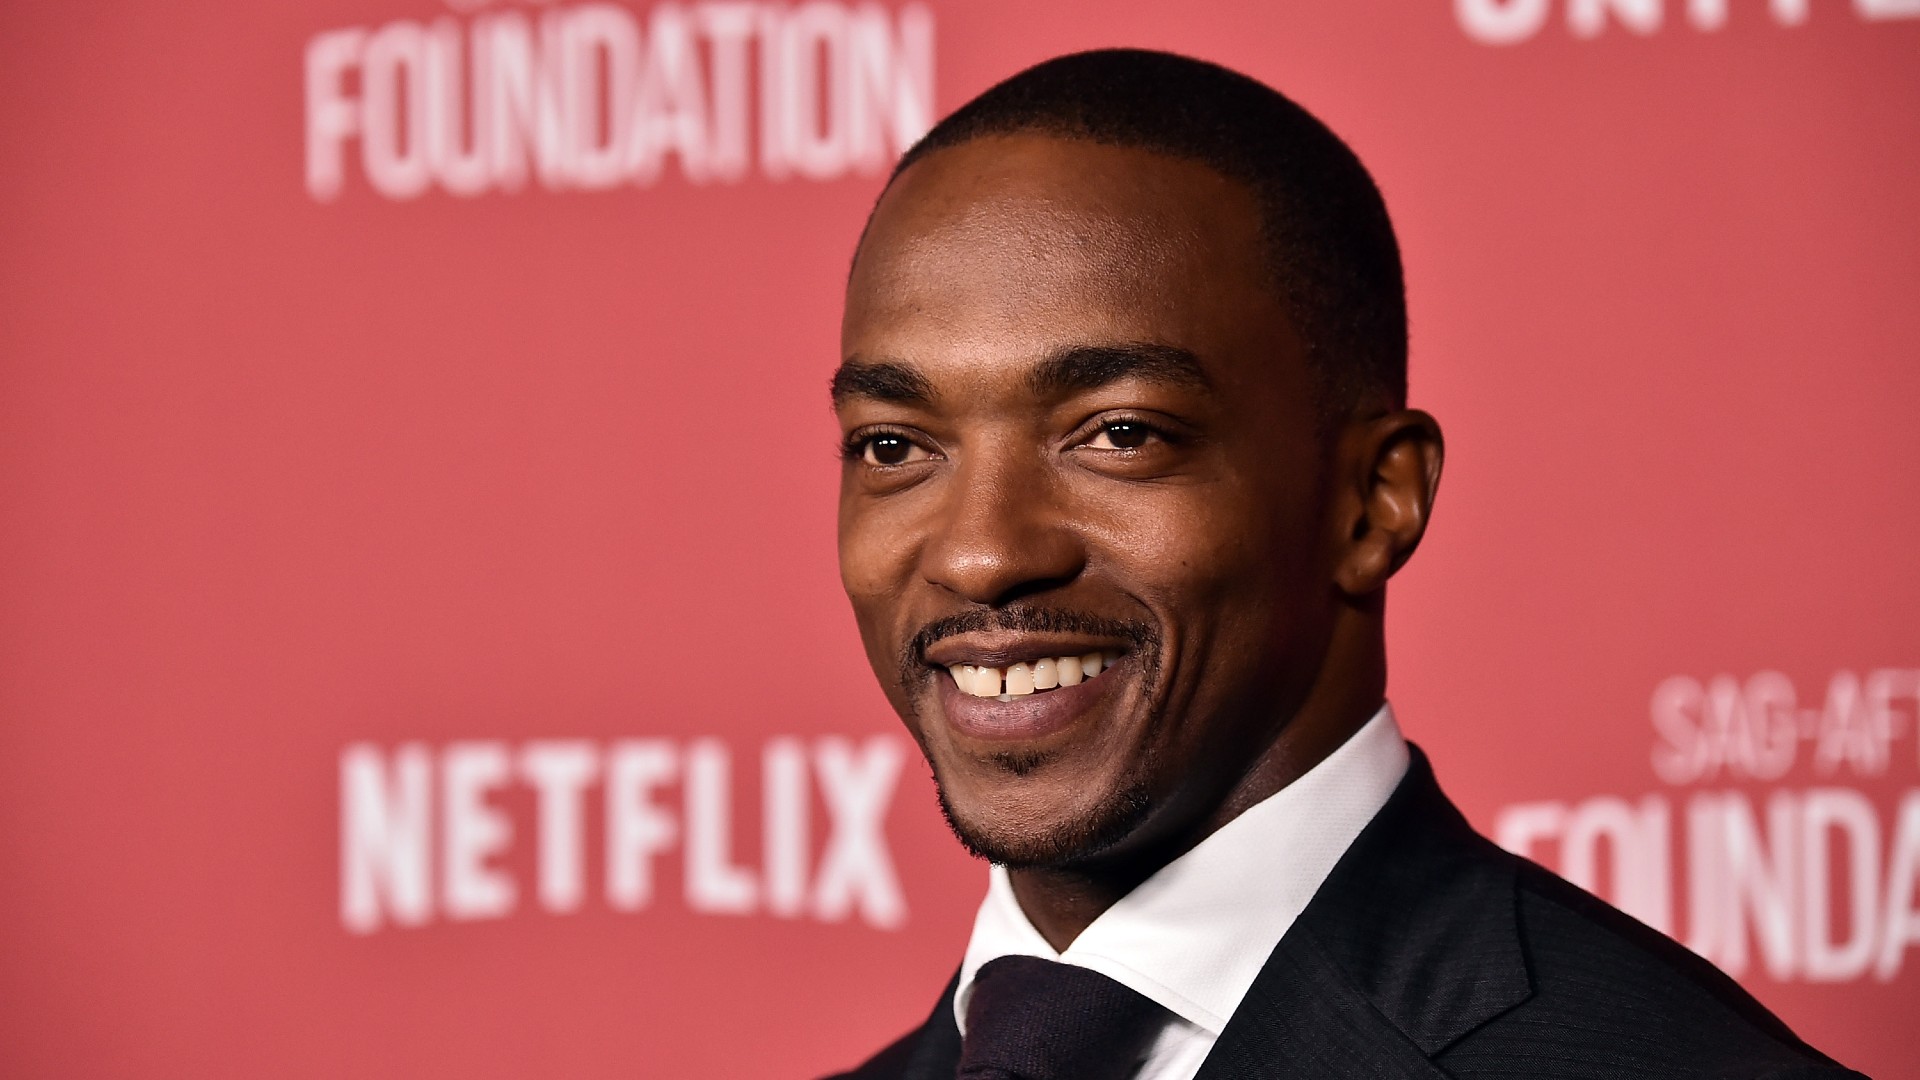 10 Things You Never Knew About Falcon Actor Anthony Mackie